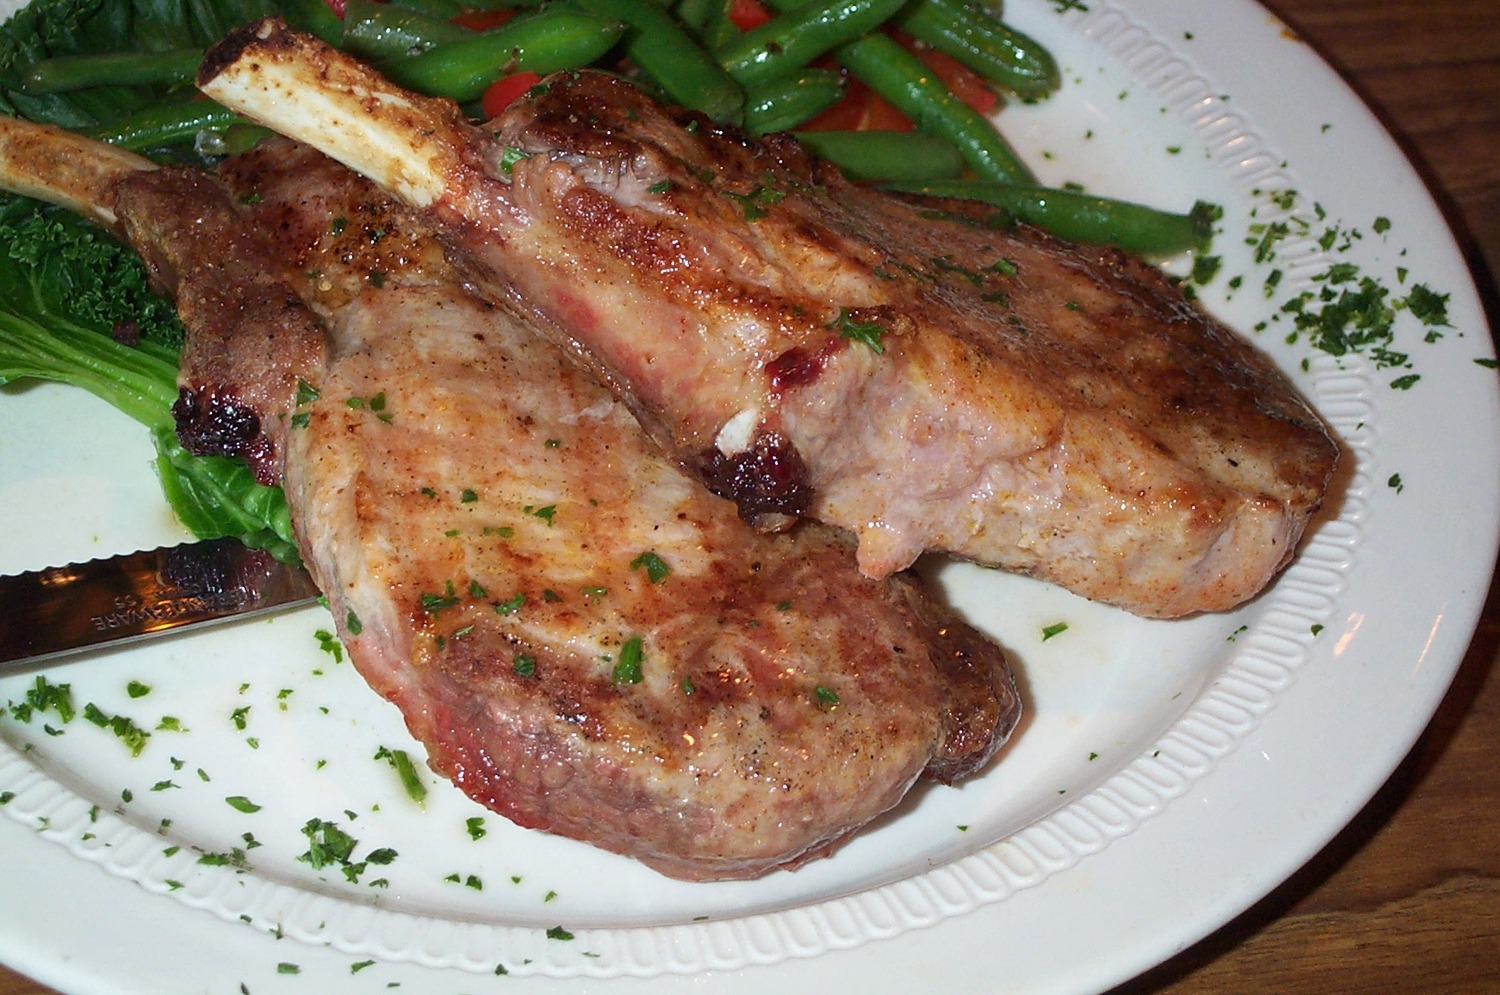 A plate of cooked pork chops.